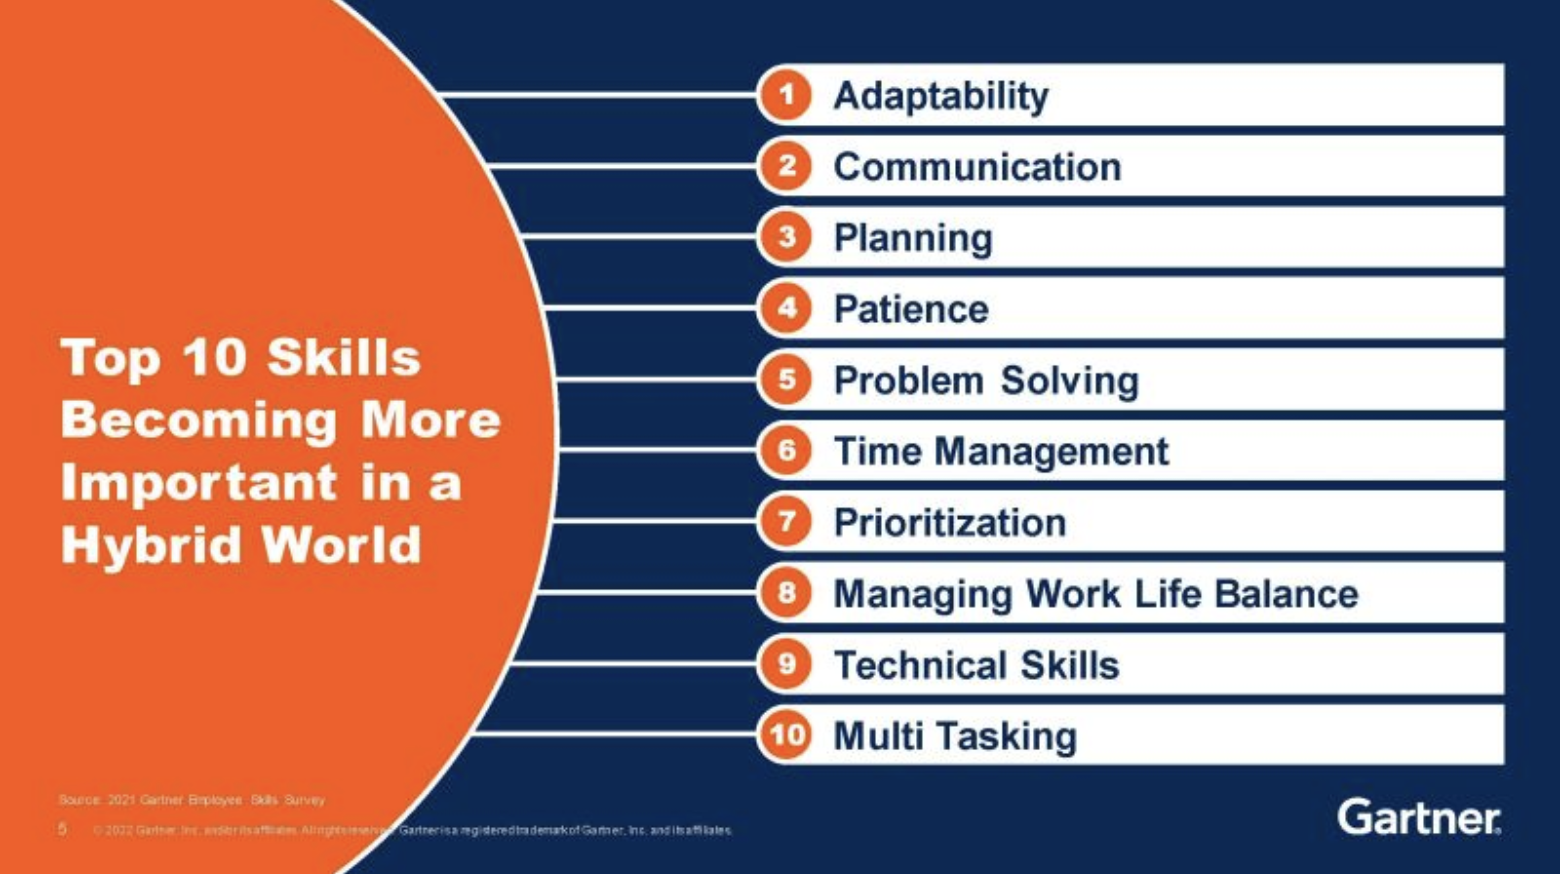 Top 10 skills becoming more important in a hybrid world